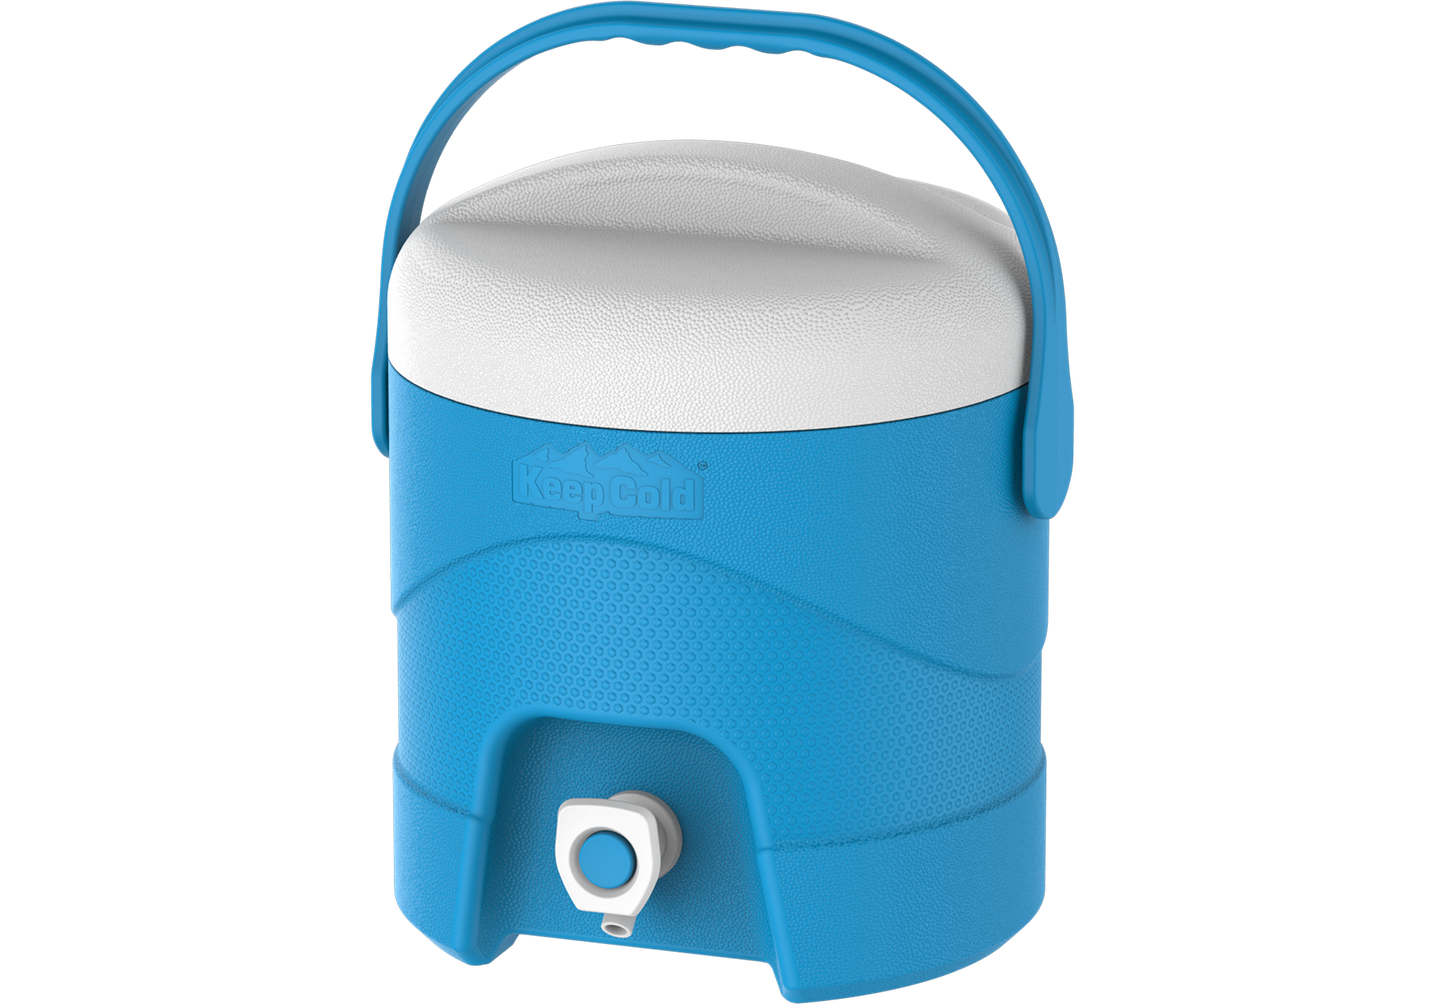 4L KeepCold Picnic Water Cooler